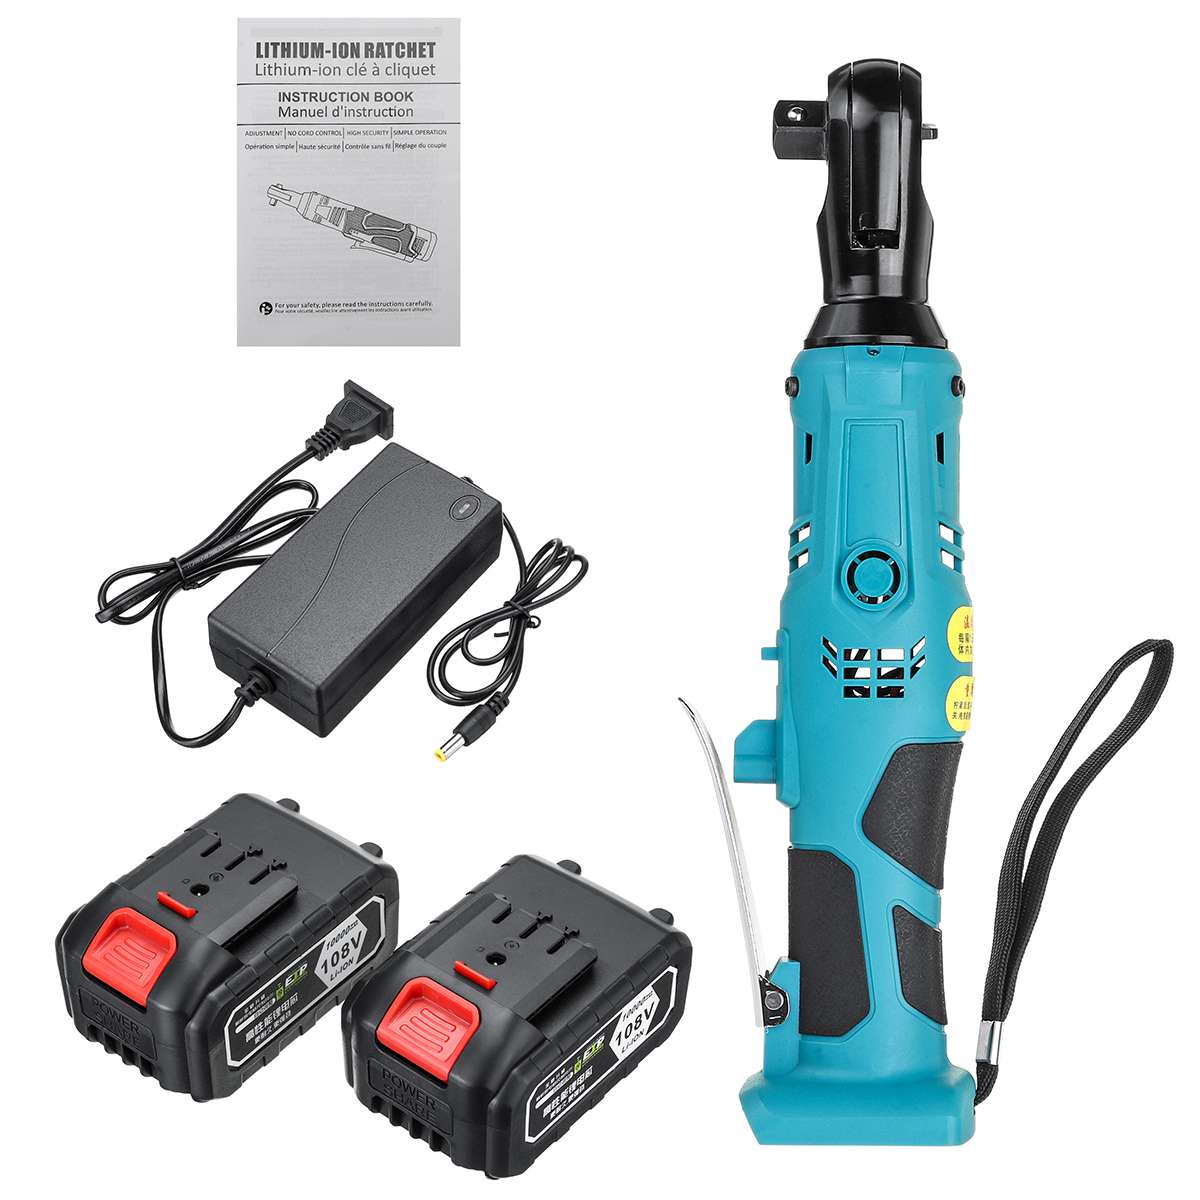 NEW 160N.m Cordless Electric Wrench 108V Ratchet Wrench Repair Tool Rechargeable Right Angle Wrench with 2 Battery Charger Kit